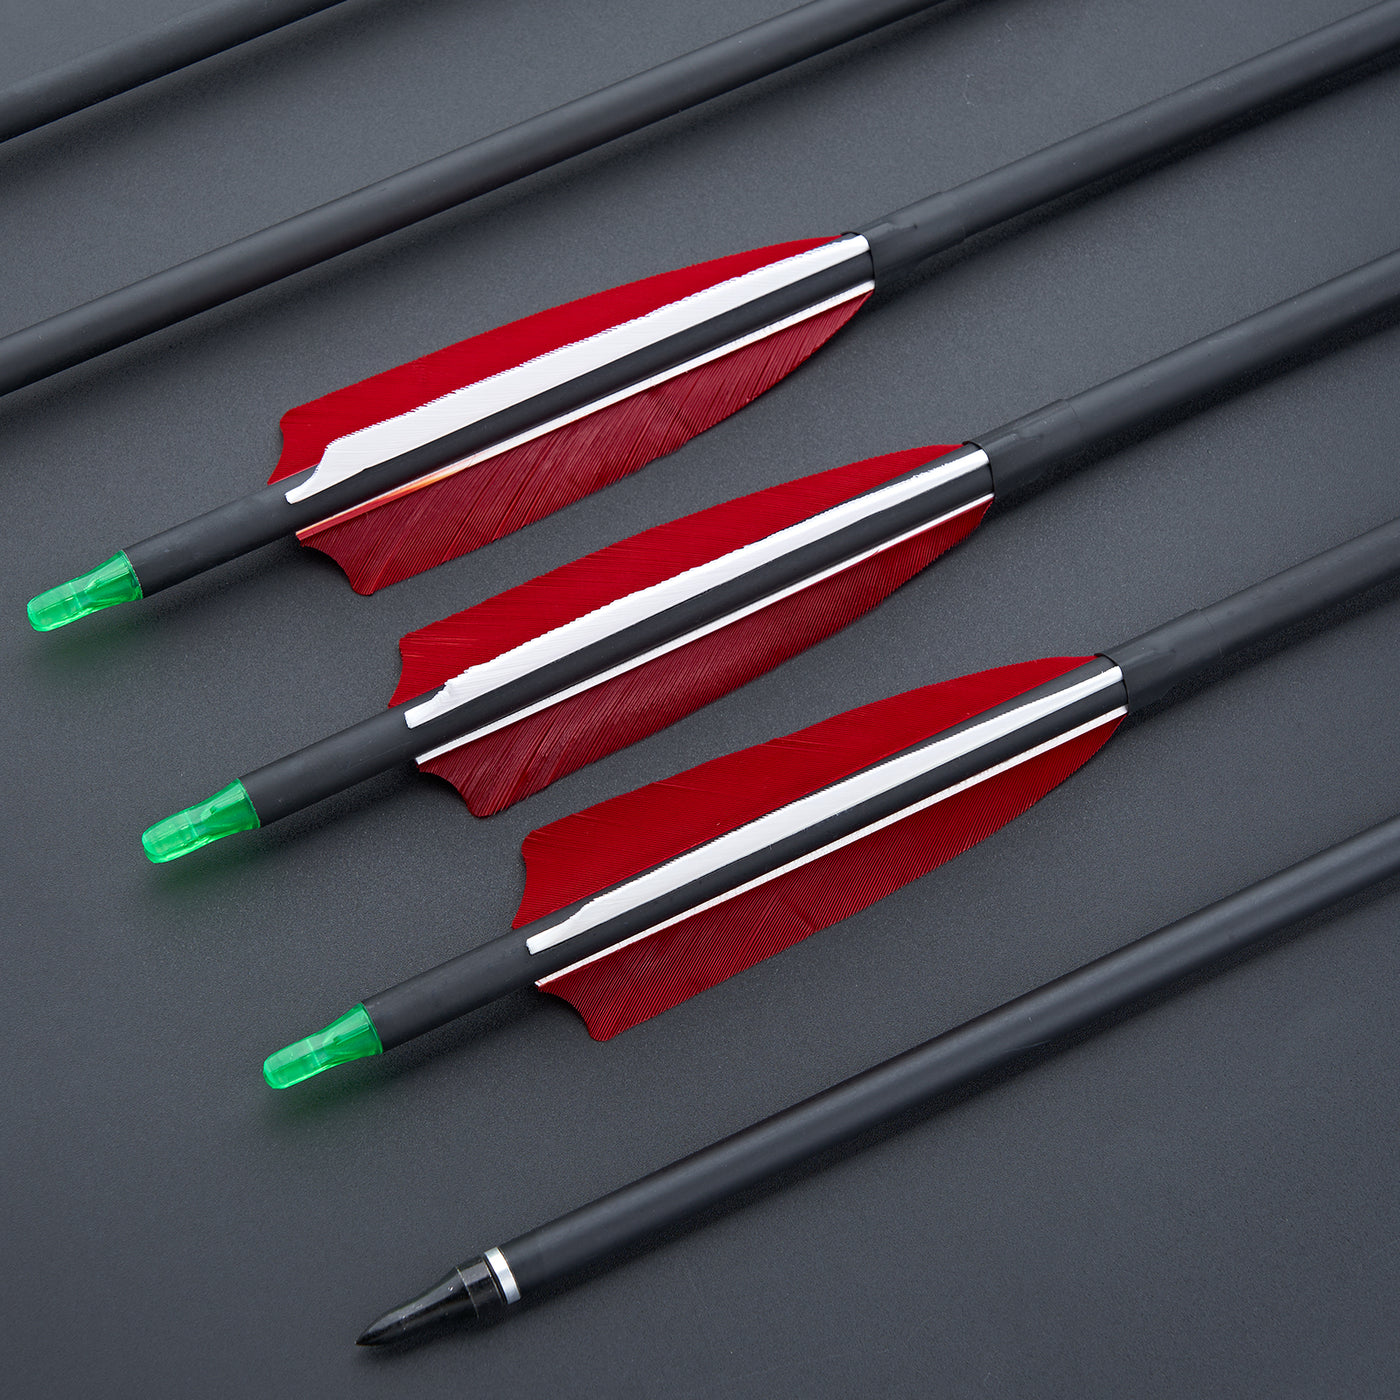 12x 31" OD 7.8mm ID 6.2mm Spine 500 Archery Arrows 4" Shield Turkey Feather Mixed Carbon Red White Fletching